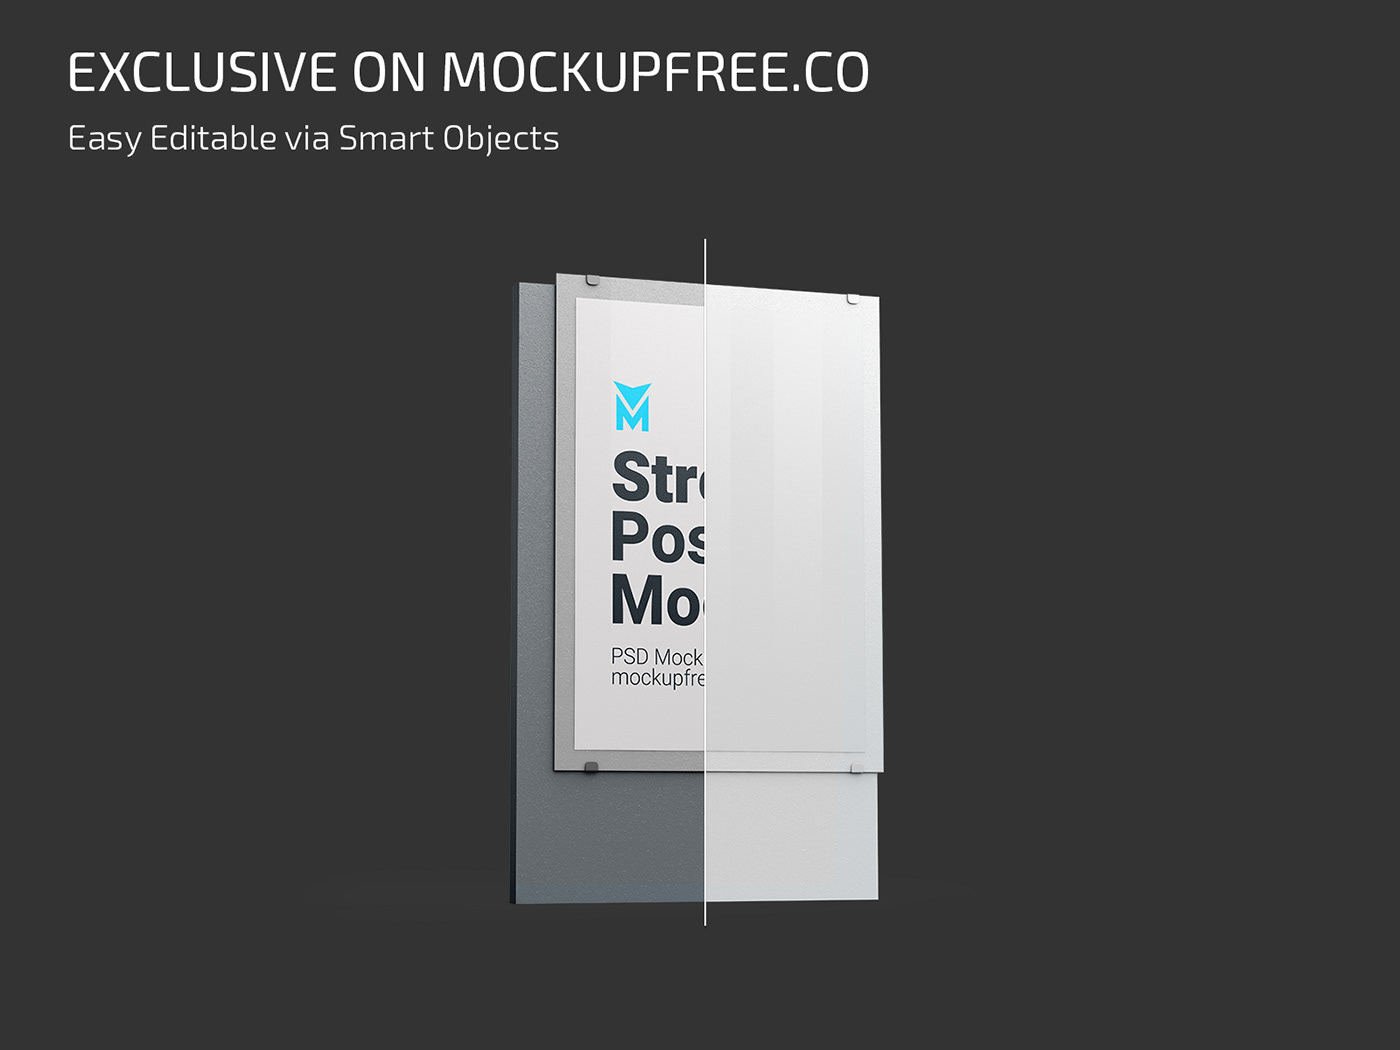 hanging Mockup mockups Outdoor photoshop poster posters psd Street template